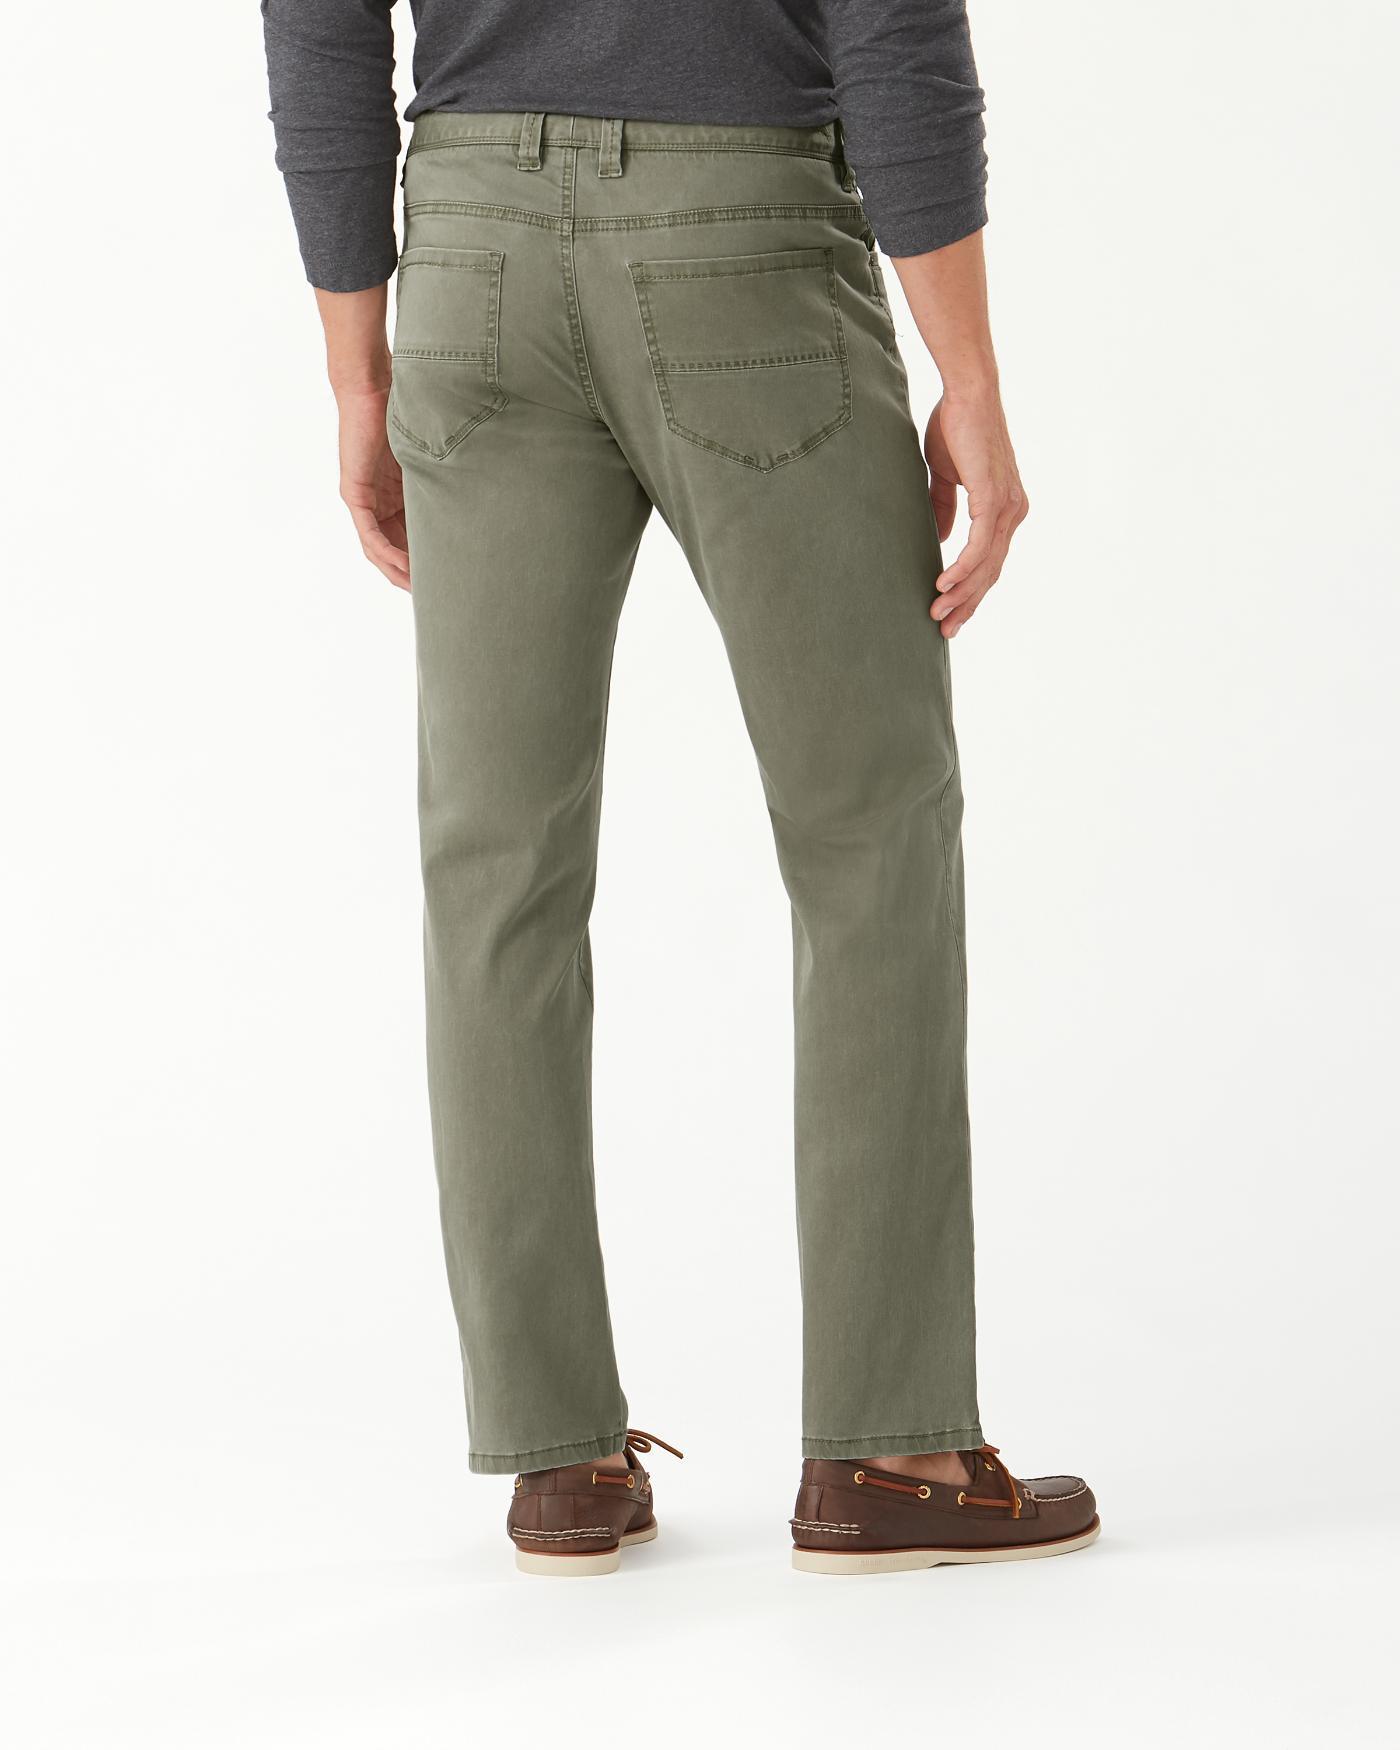 Tommy Bahama Cotton Boracay 5-pocket Chino Pants in Green for Men - Lyst